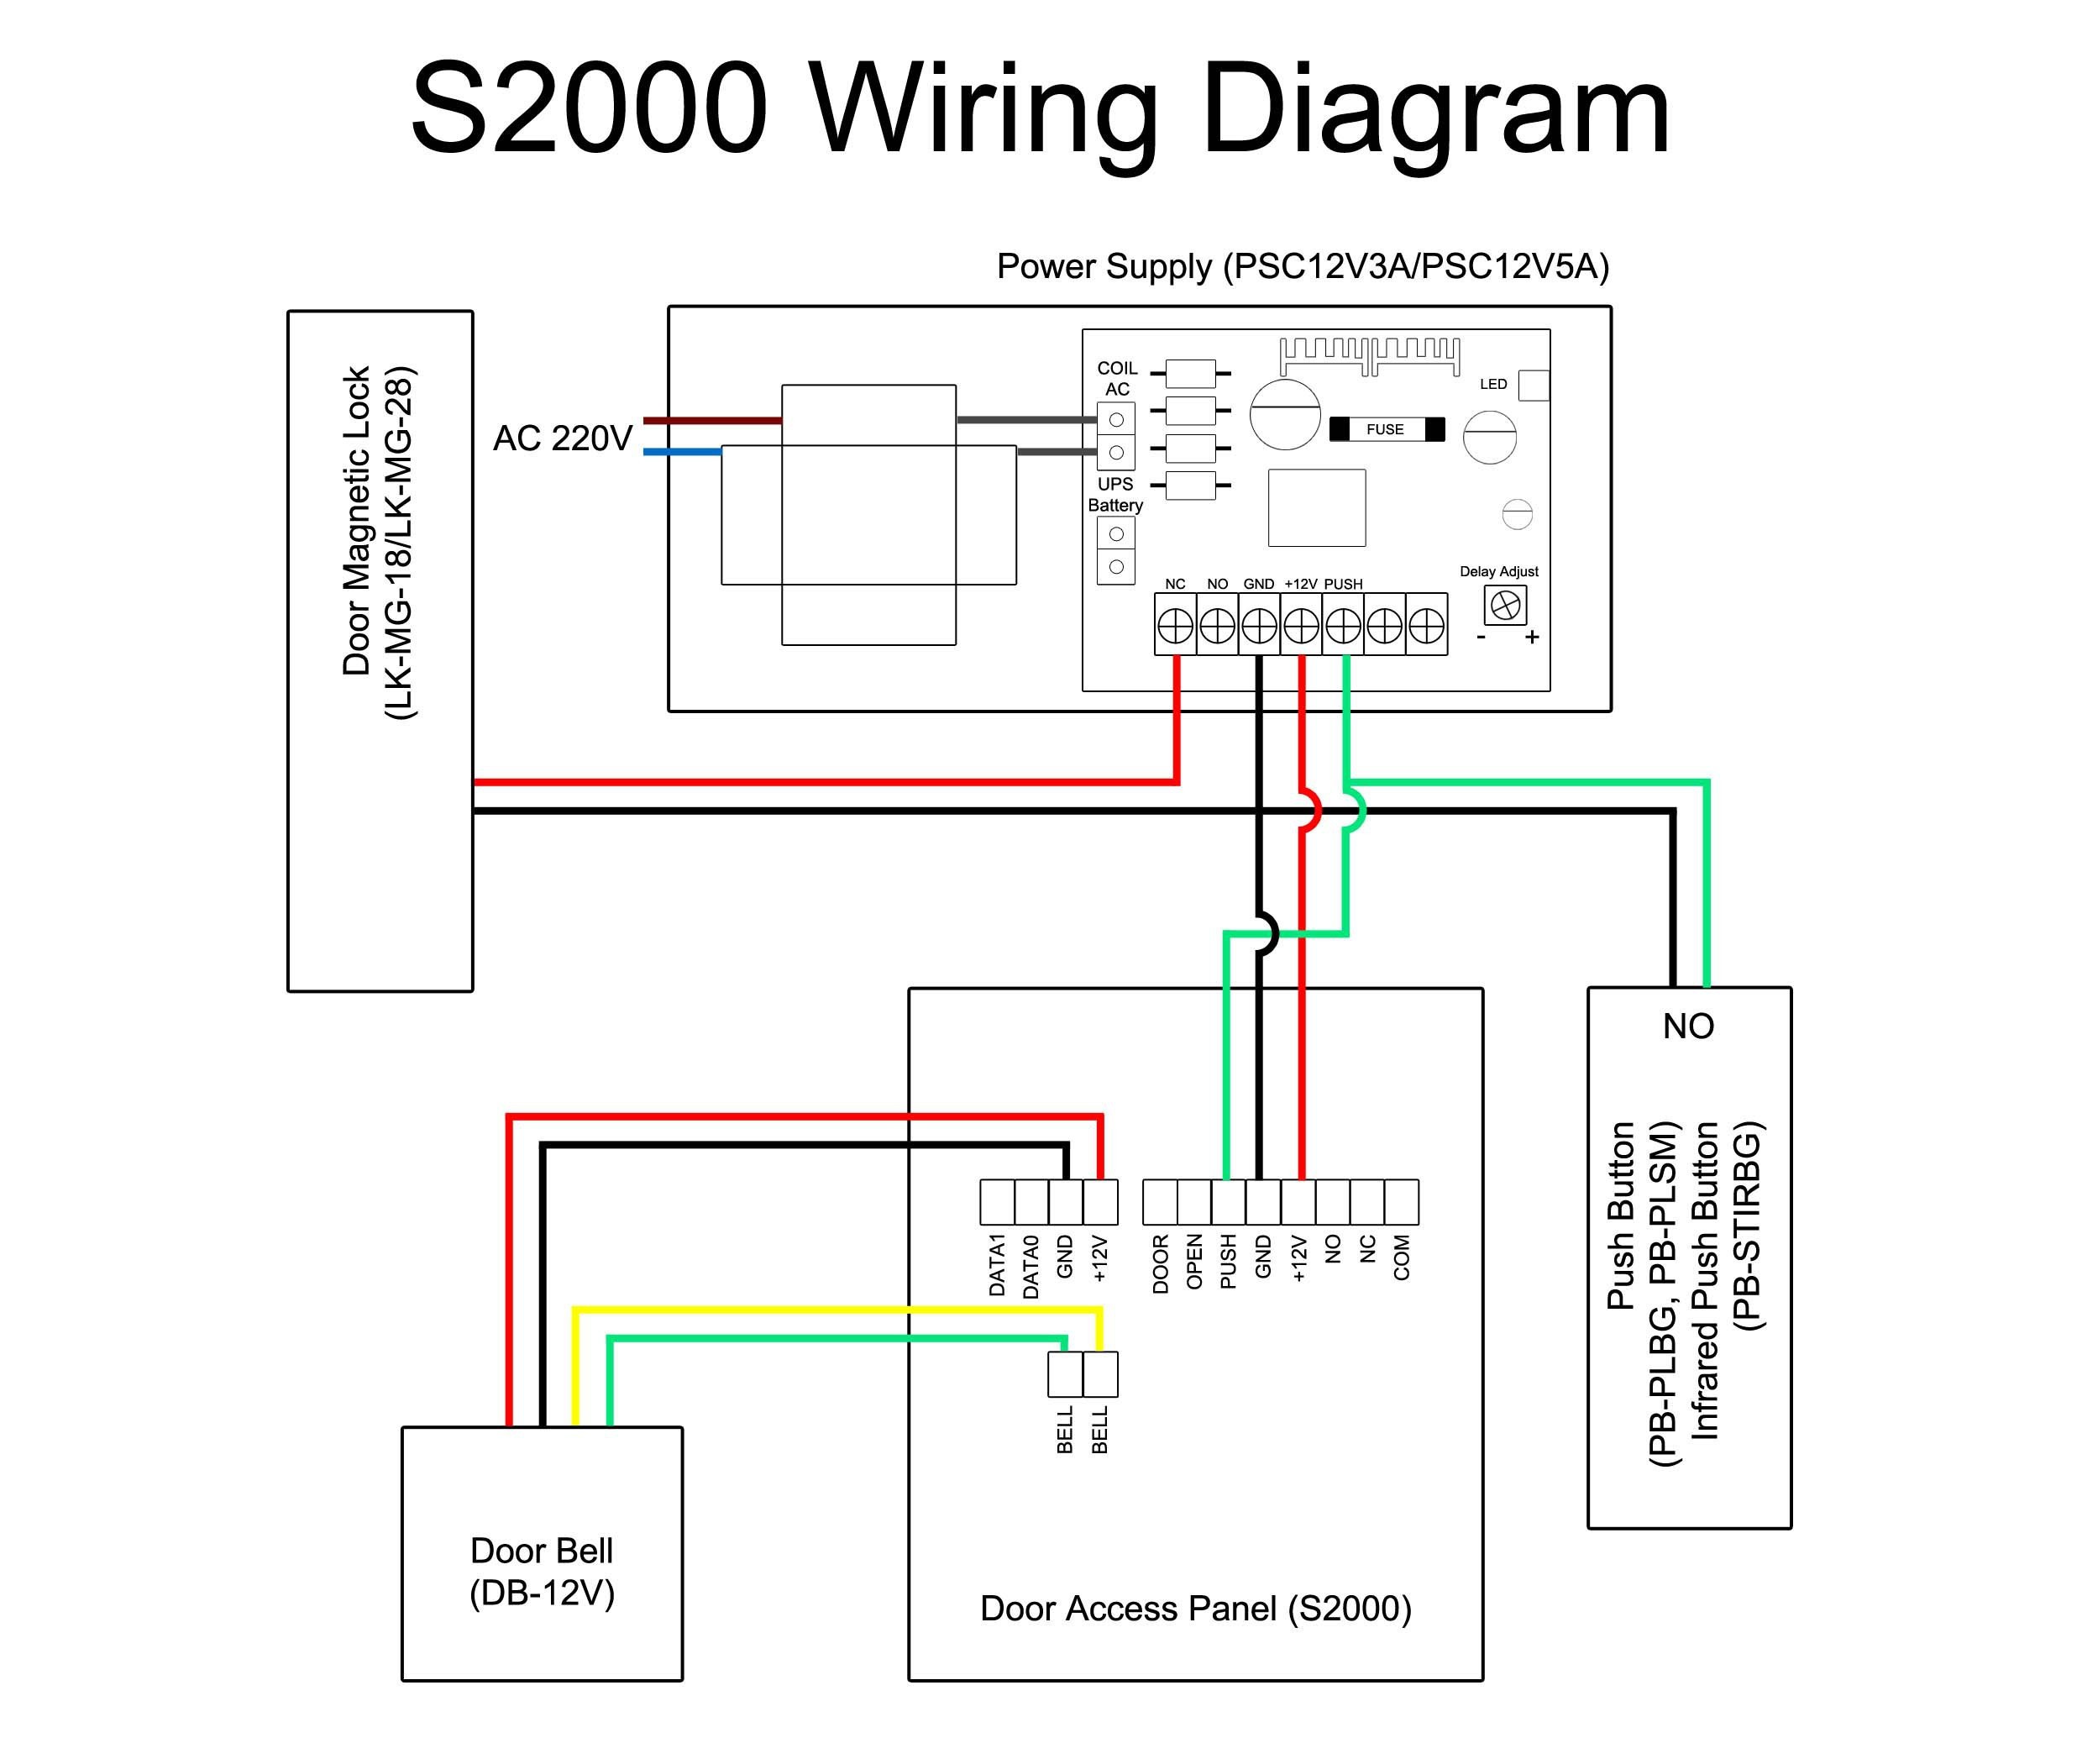 Wiring Diagram for Home Security Camera Save Home Cctv Wiring Diagram Save Best Harbor Freight